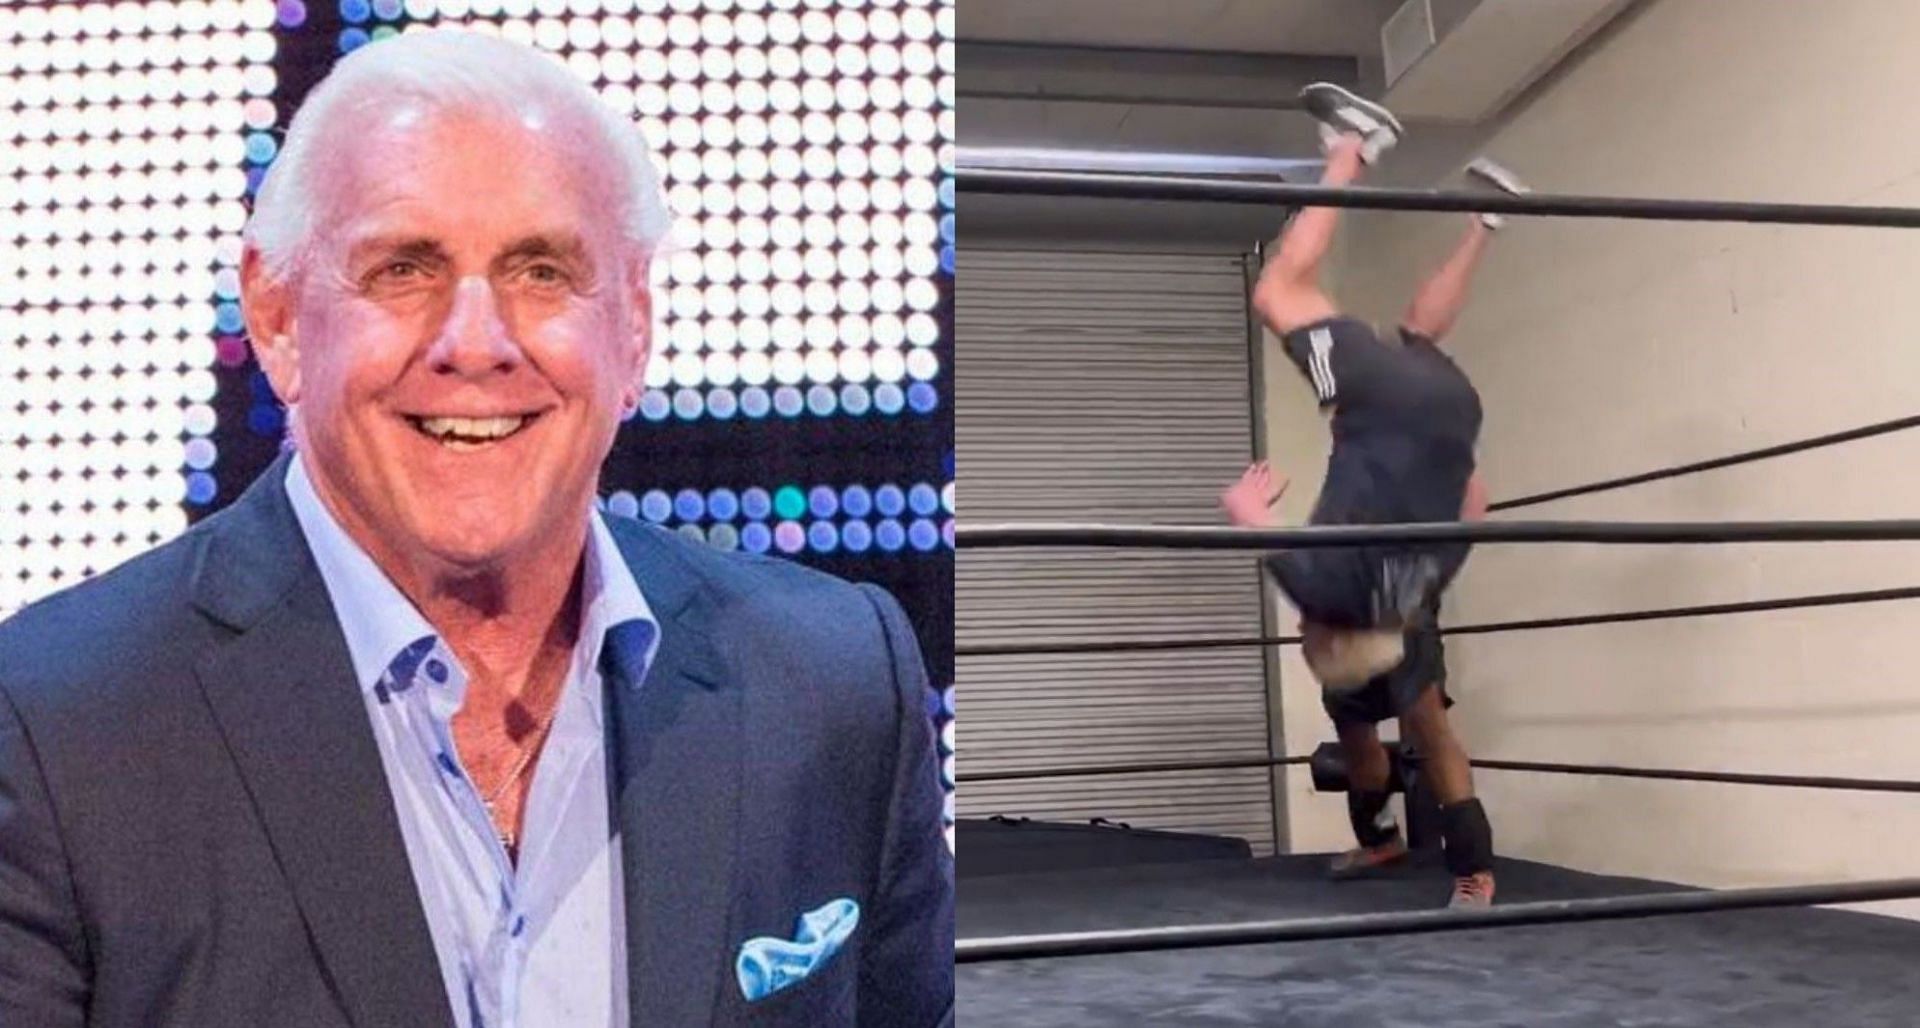 Ric Flair has been training alongside Jay Lethal!